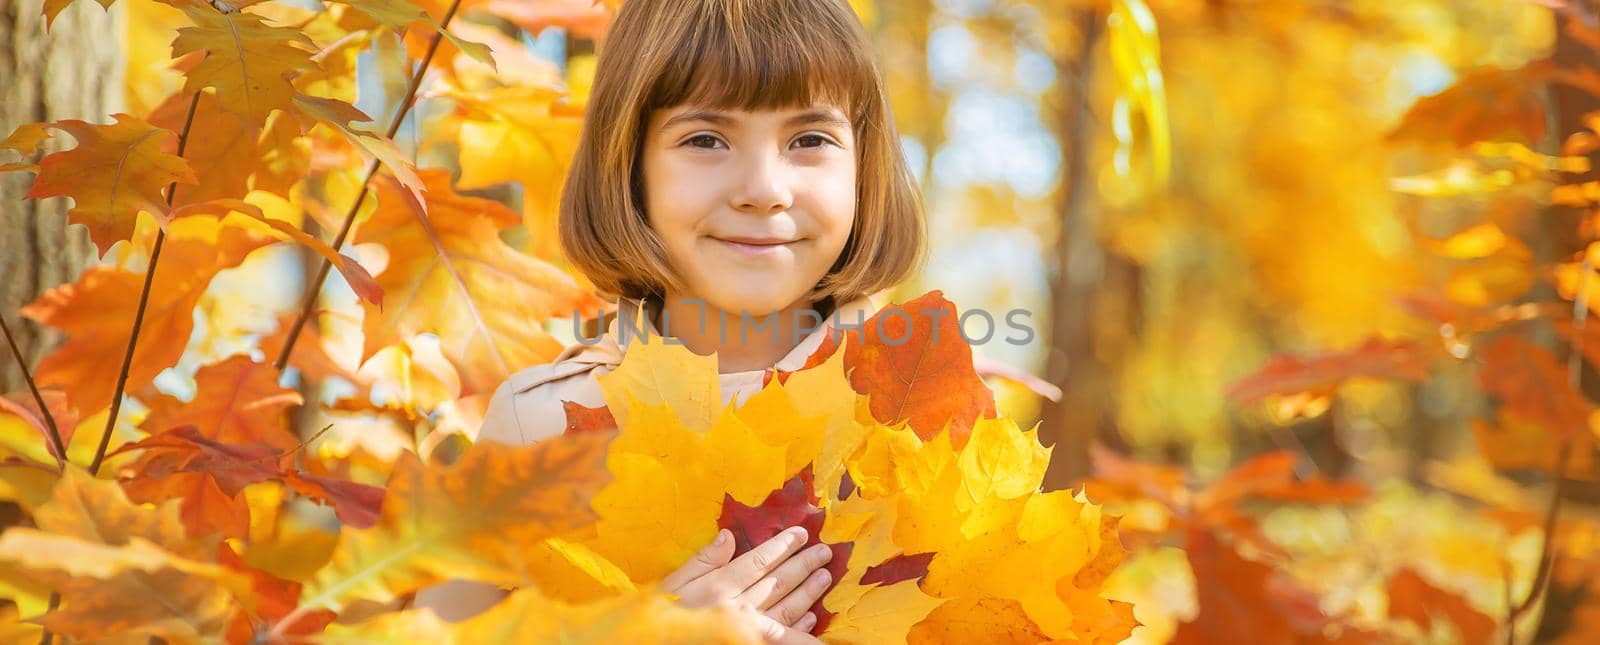 Children in the park with autumn leaves. Selective focus.